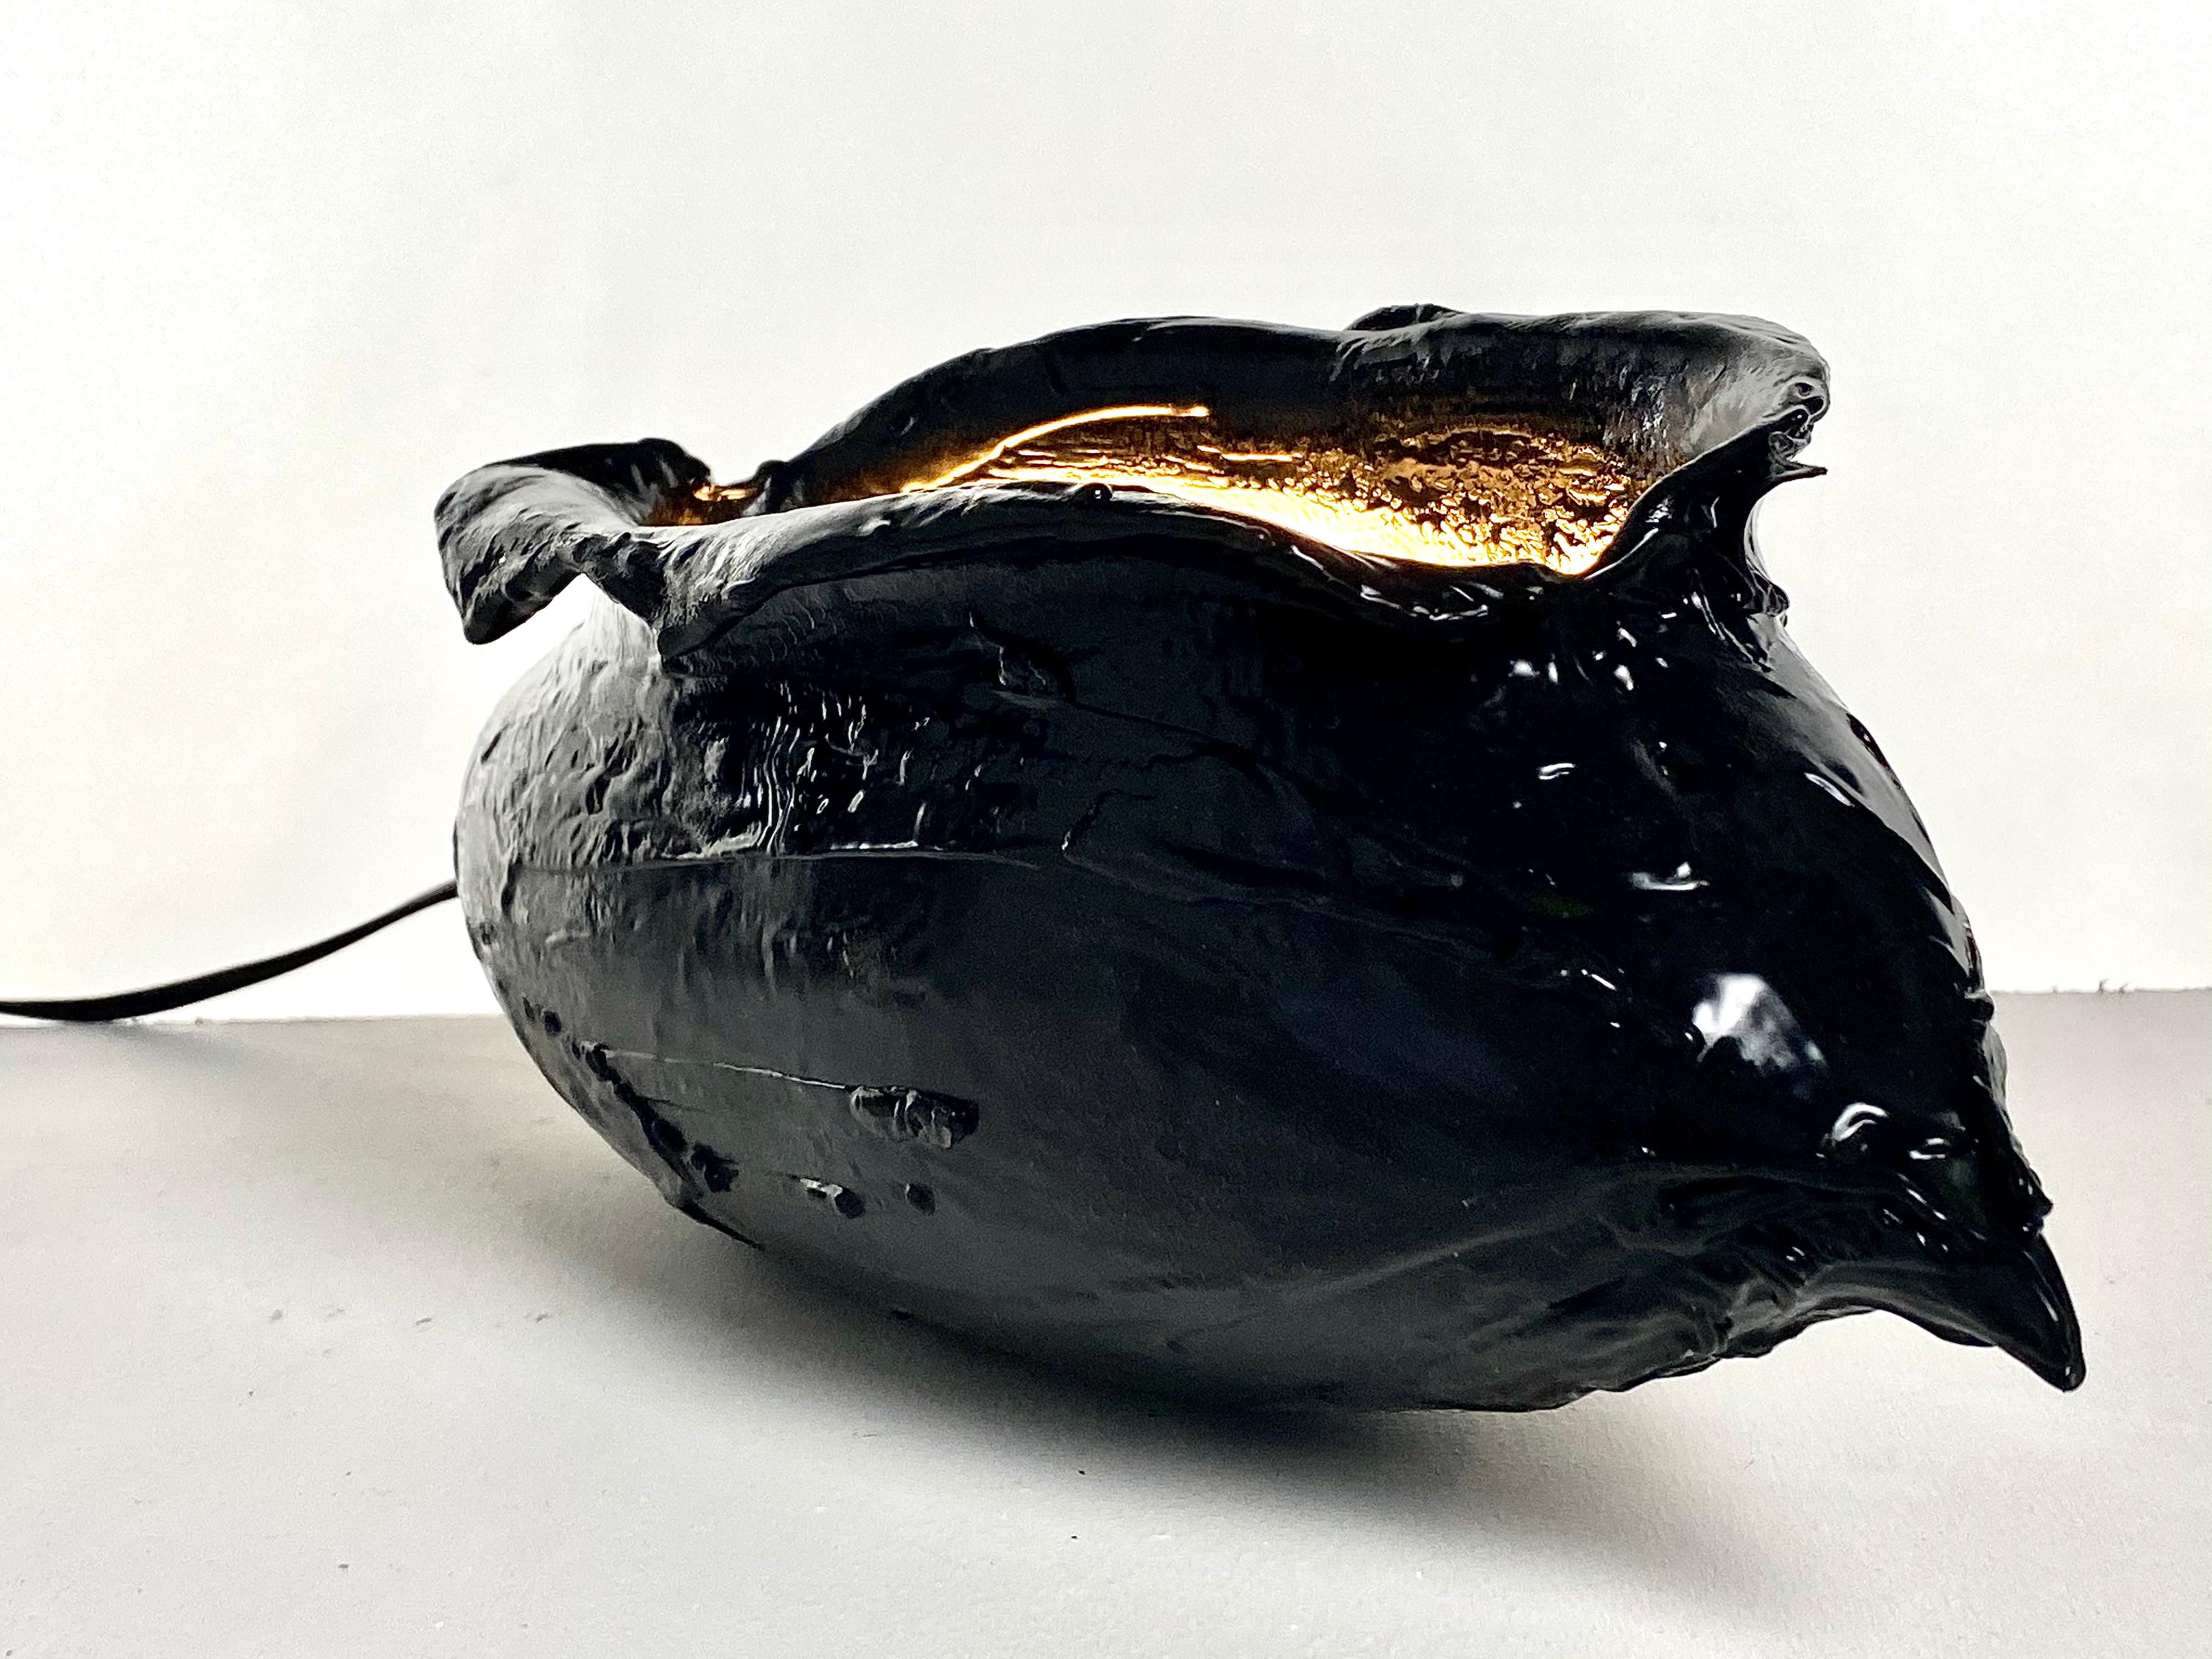 American Blown Glass Black Rubber Pendent or Table Light, 21st Century by Mattia Biagi For Sale